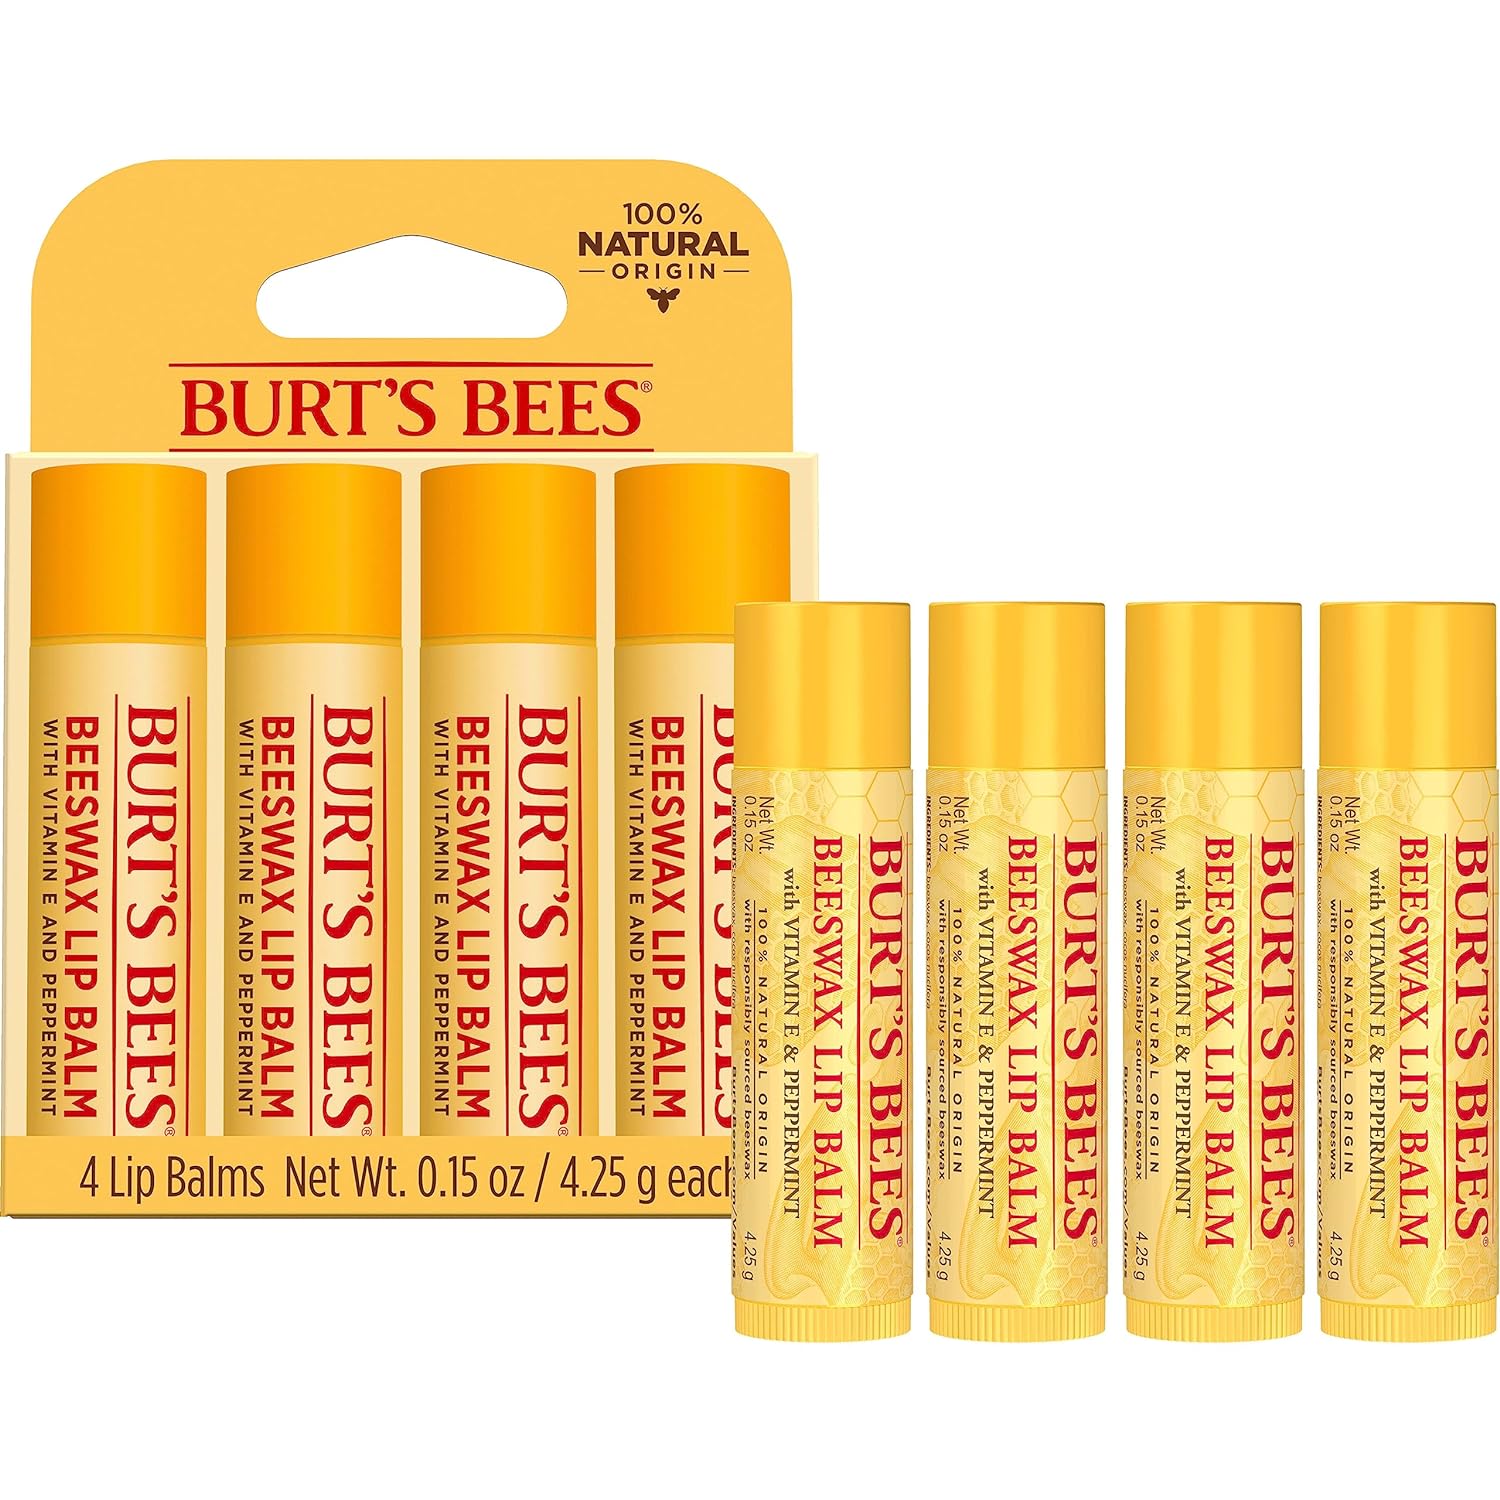 Burt's Bees Lip Balm Stocking Stuffers, Moisturizing Lip Care Christmas Gifts, Original Beeswax with Vitamin E & Peppermint Oil, 100% Natural, 4 Count (Pack of 1)